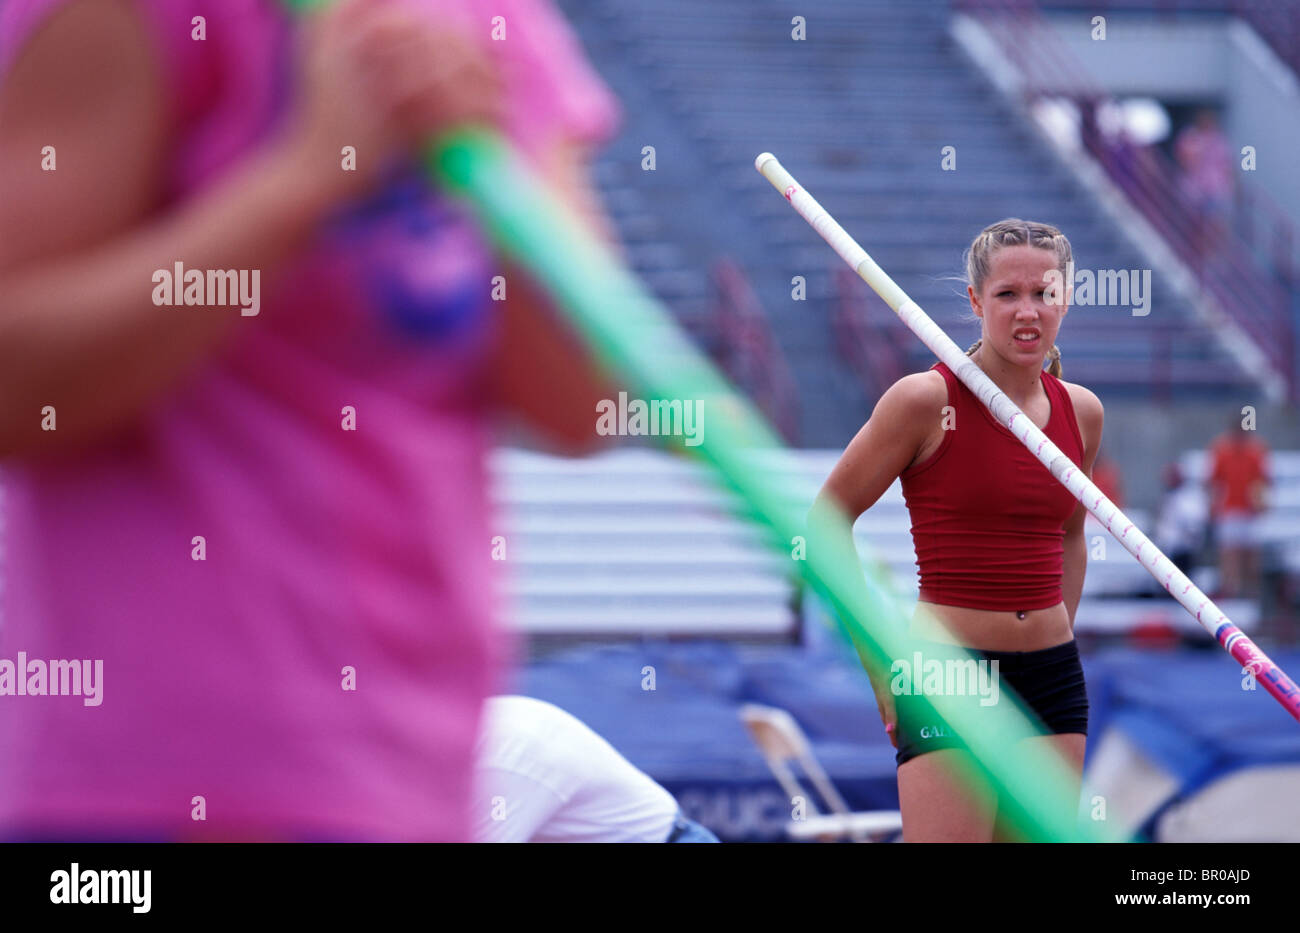 A teenage girl rests her pole on her shoulder in between pole vaulting jumps at a track meet. Stock Photo